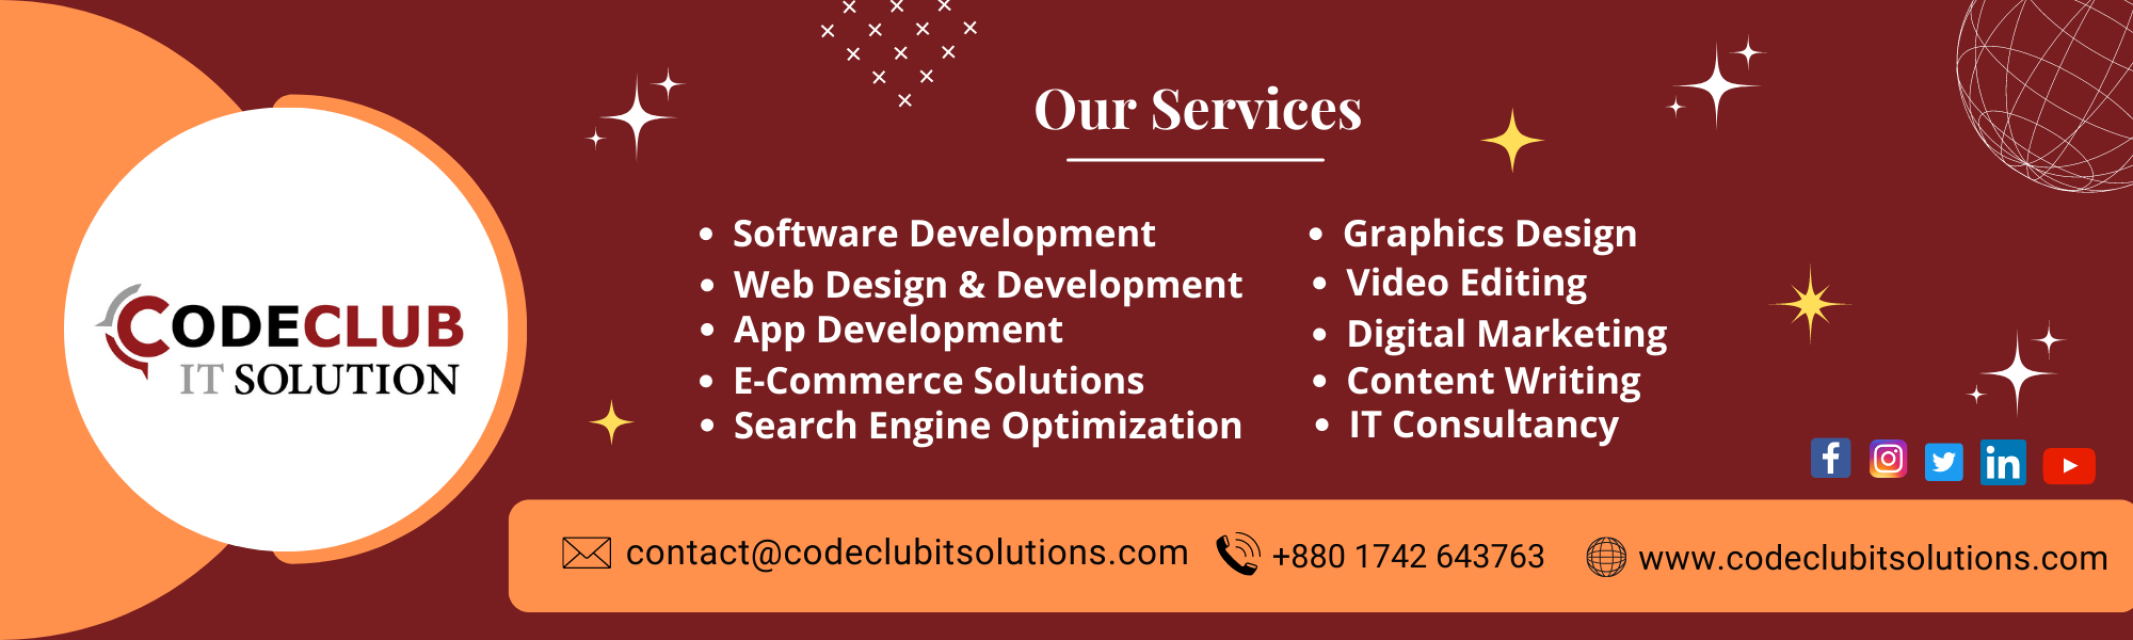 Codeclub IT Solutions